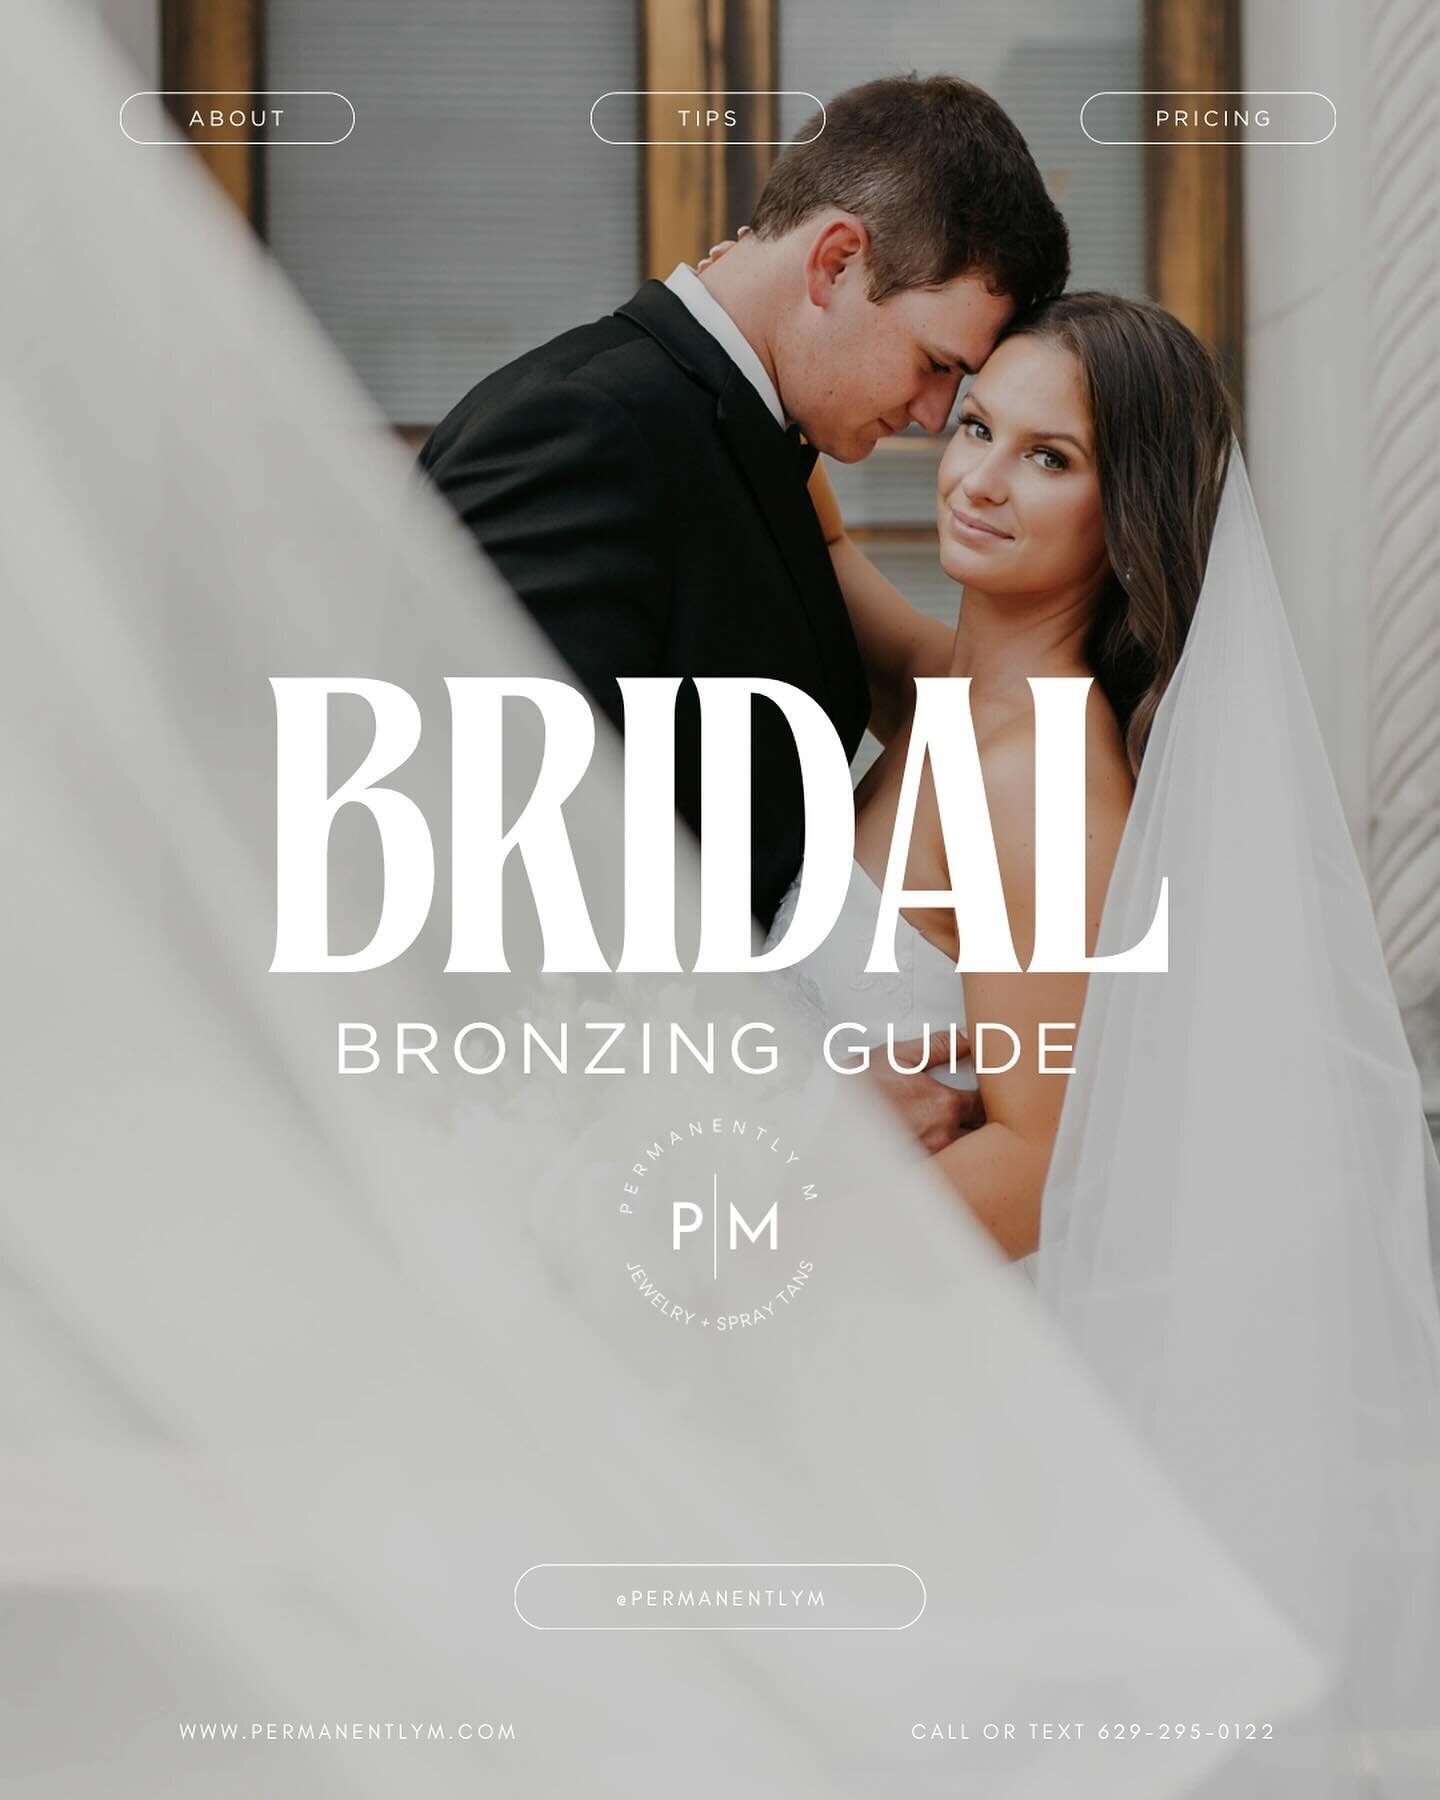 📢 2024 Brides, this one&rsquo;s for you!!!

We are so excited to announce our NEW Bridal Spray Tan and Bridal Bundle options

Contact us to book🤍

PERMANENTLY M
📞629-295-0122
📍133 Cason Lane, Murfreesboro, TN 37128
📧permanentlym@gmail.com
🛜www.